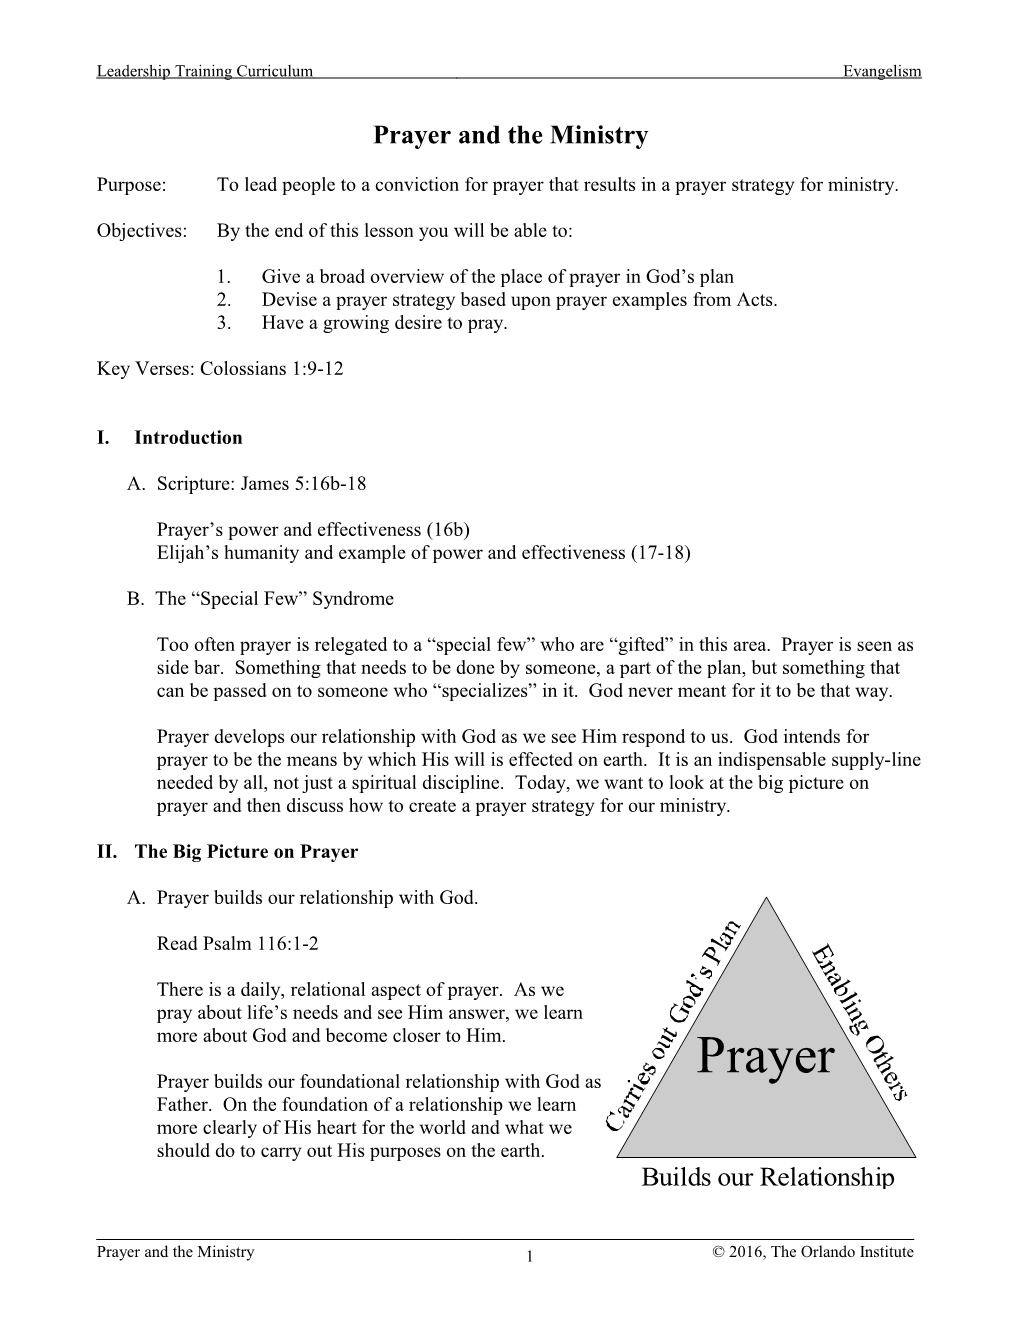 Prayer and the Ministry